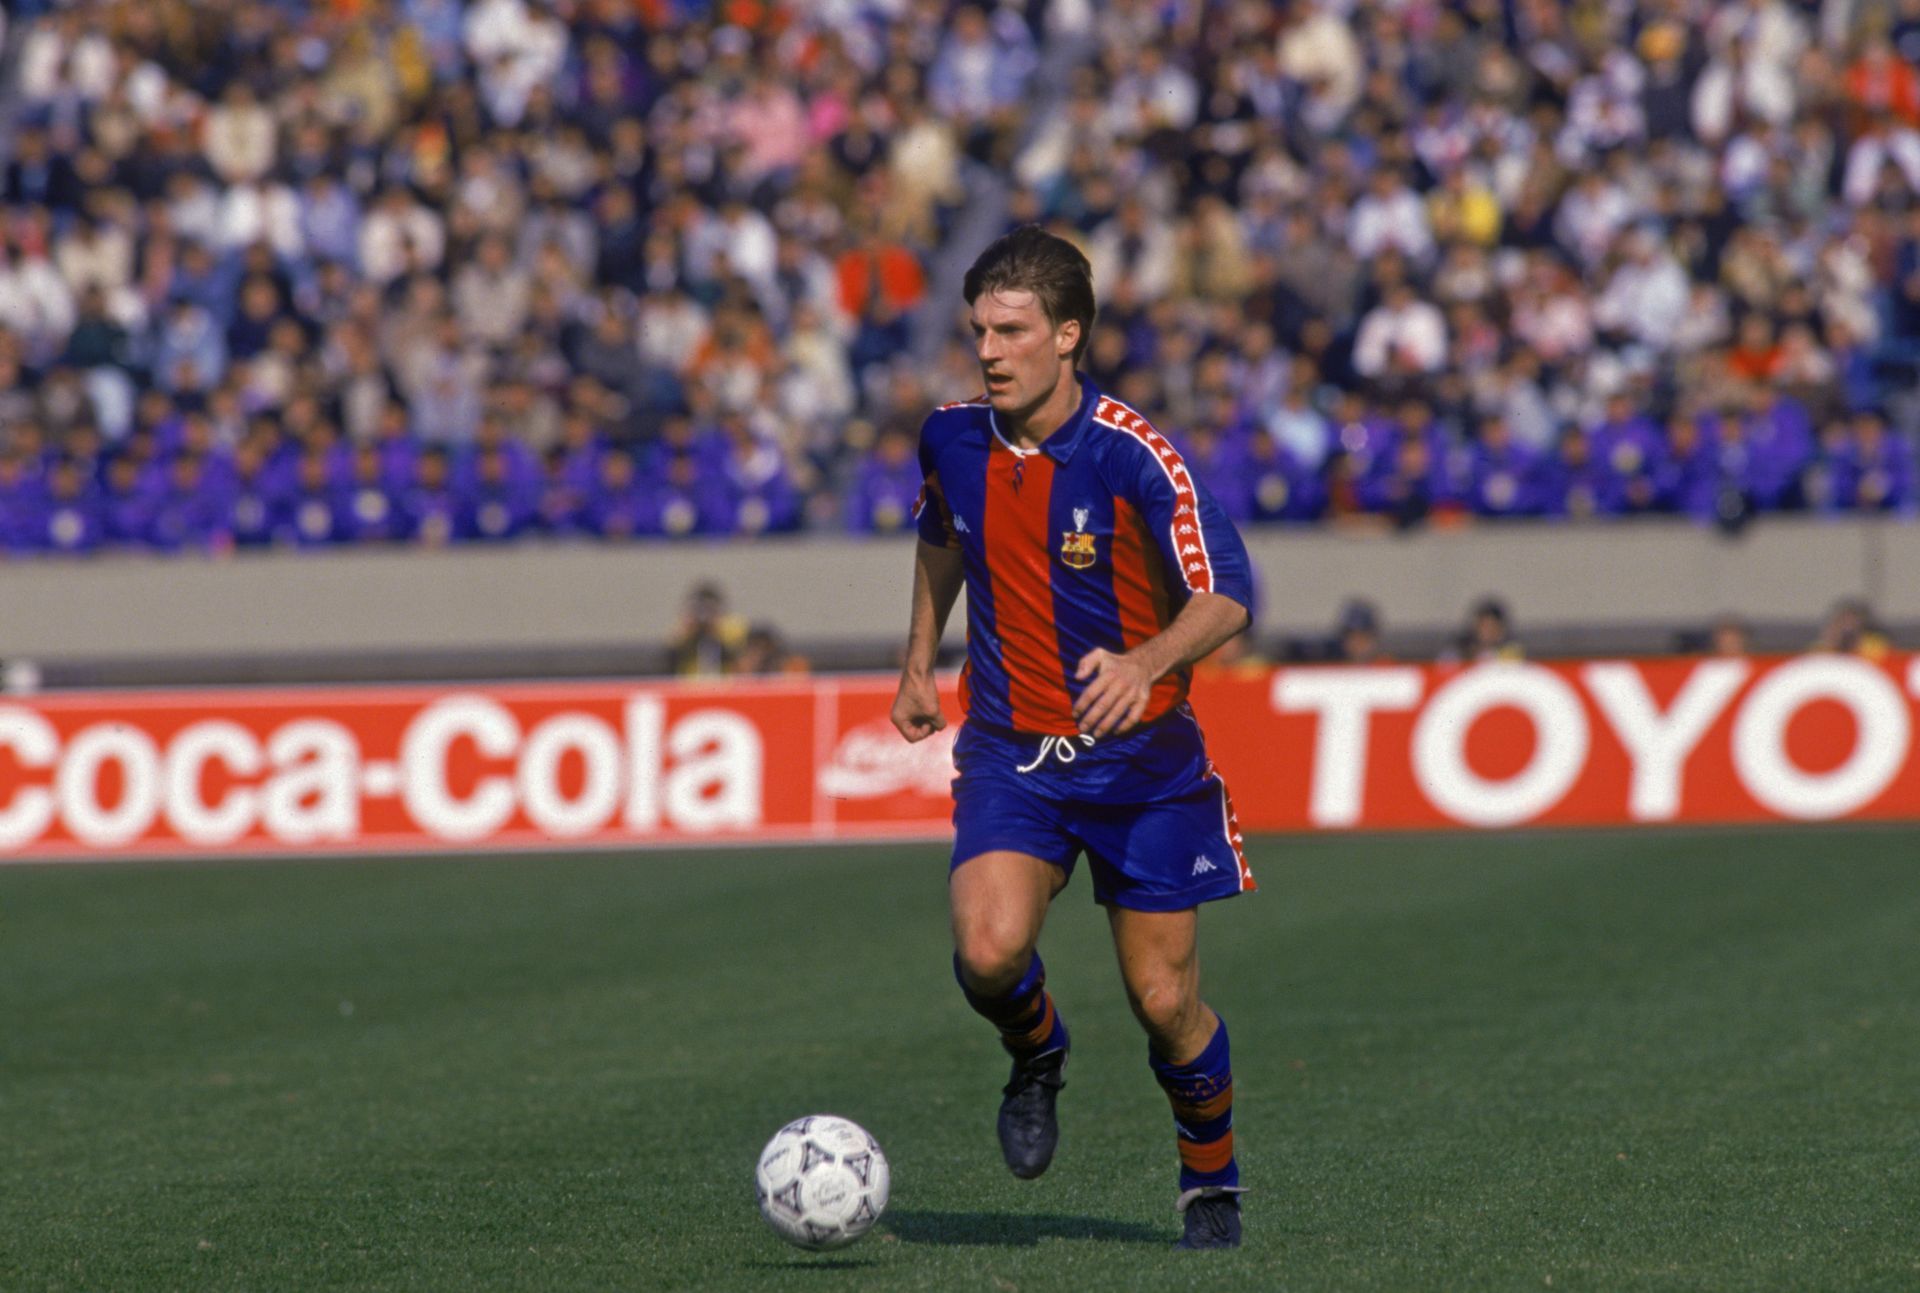 Michael Laudrup in action for FC Barcelona